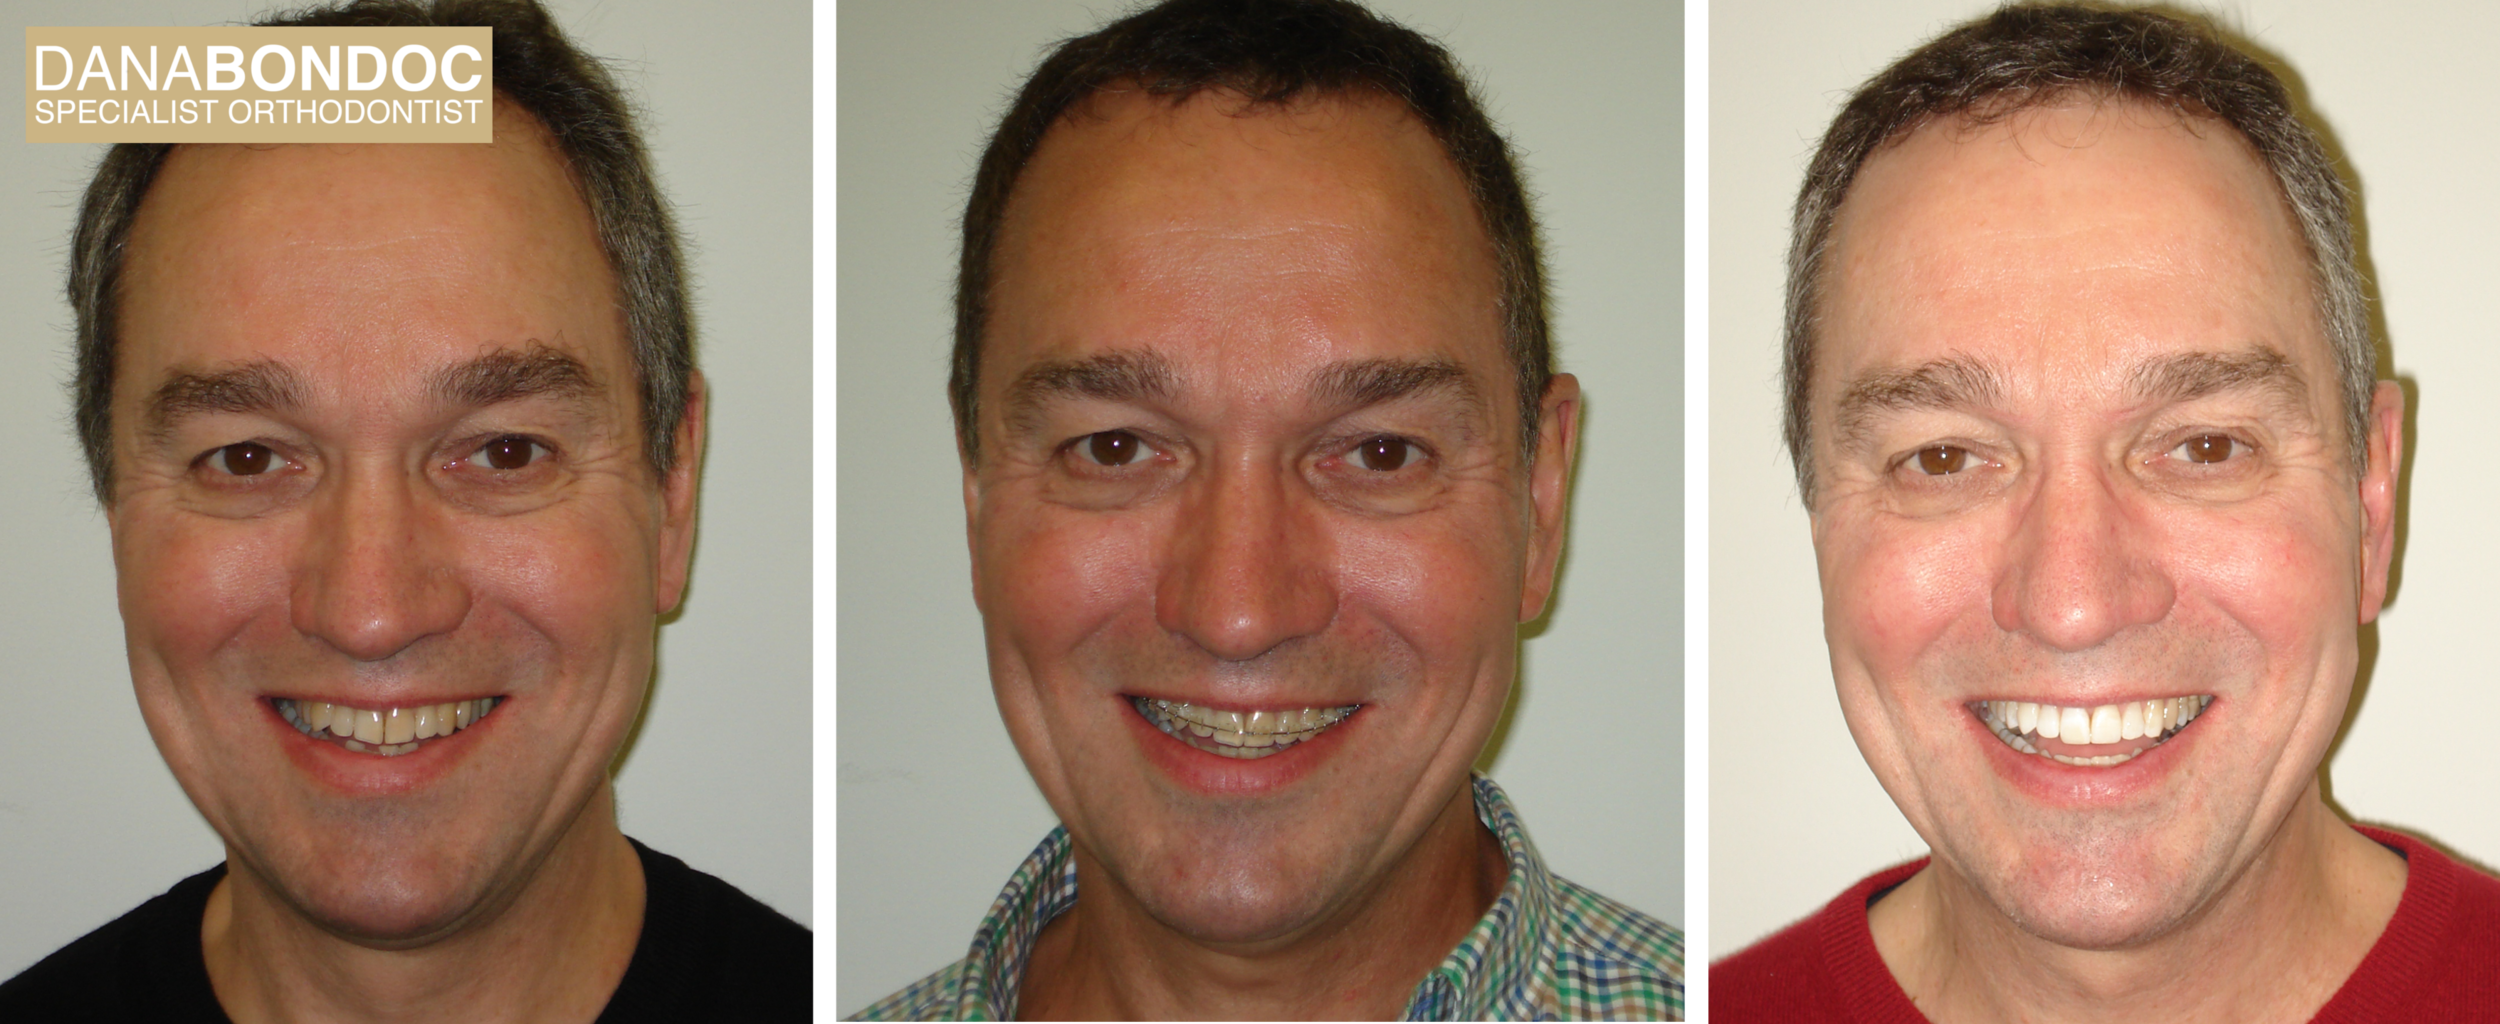 Before treatment, with clear braces on, after treatment photos of male adult patient plus a written testimonial.